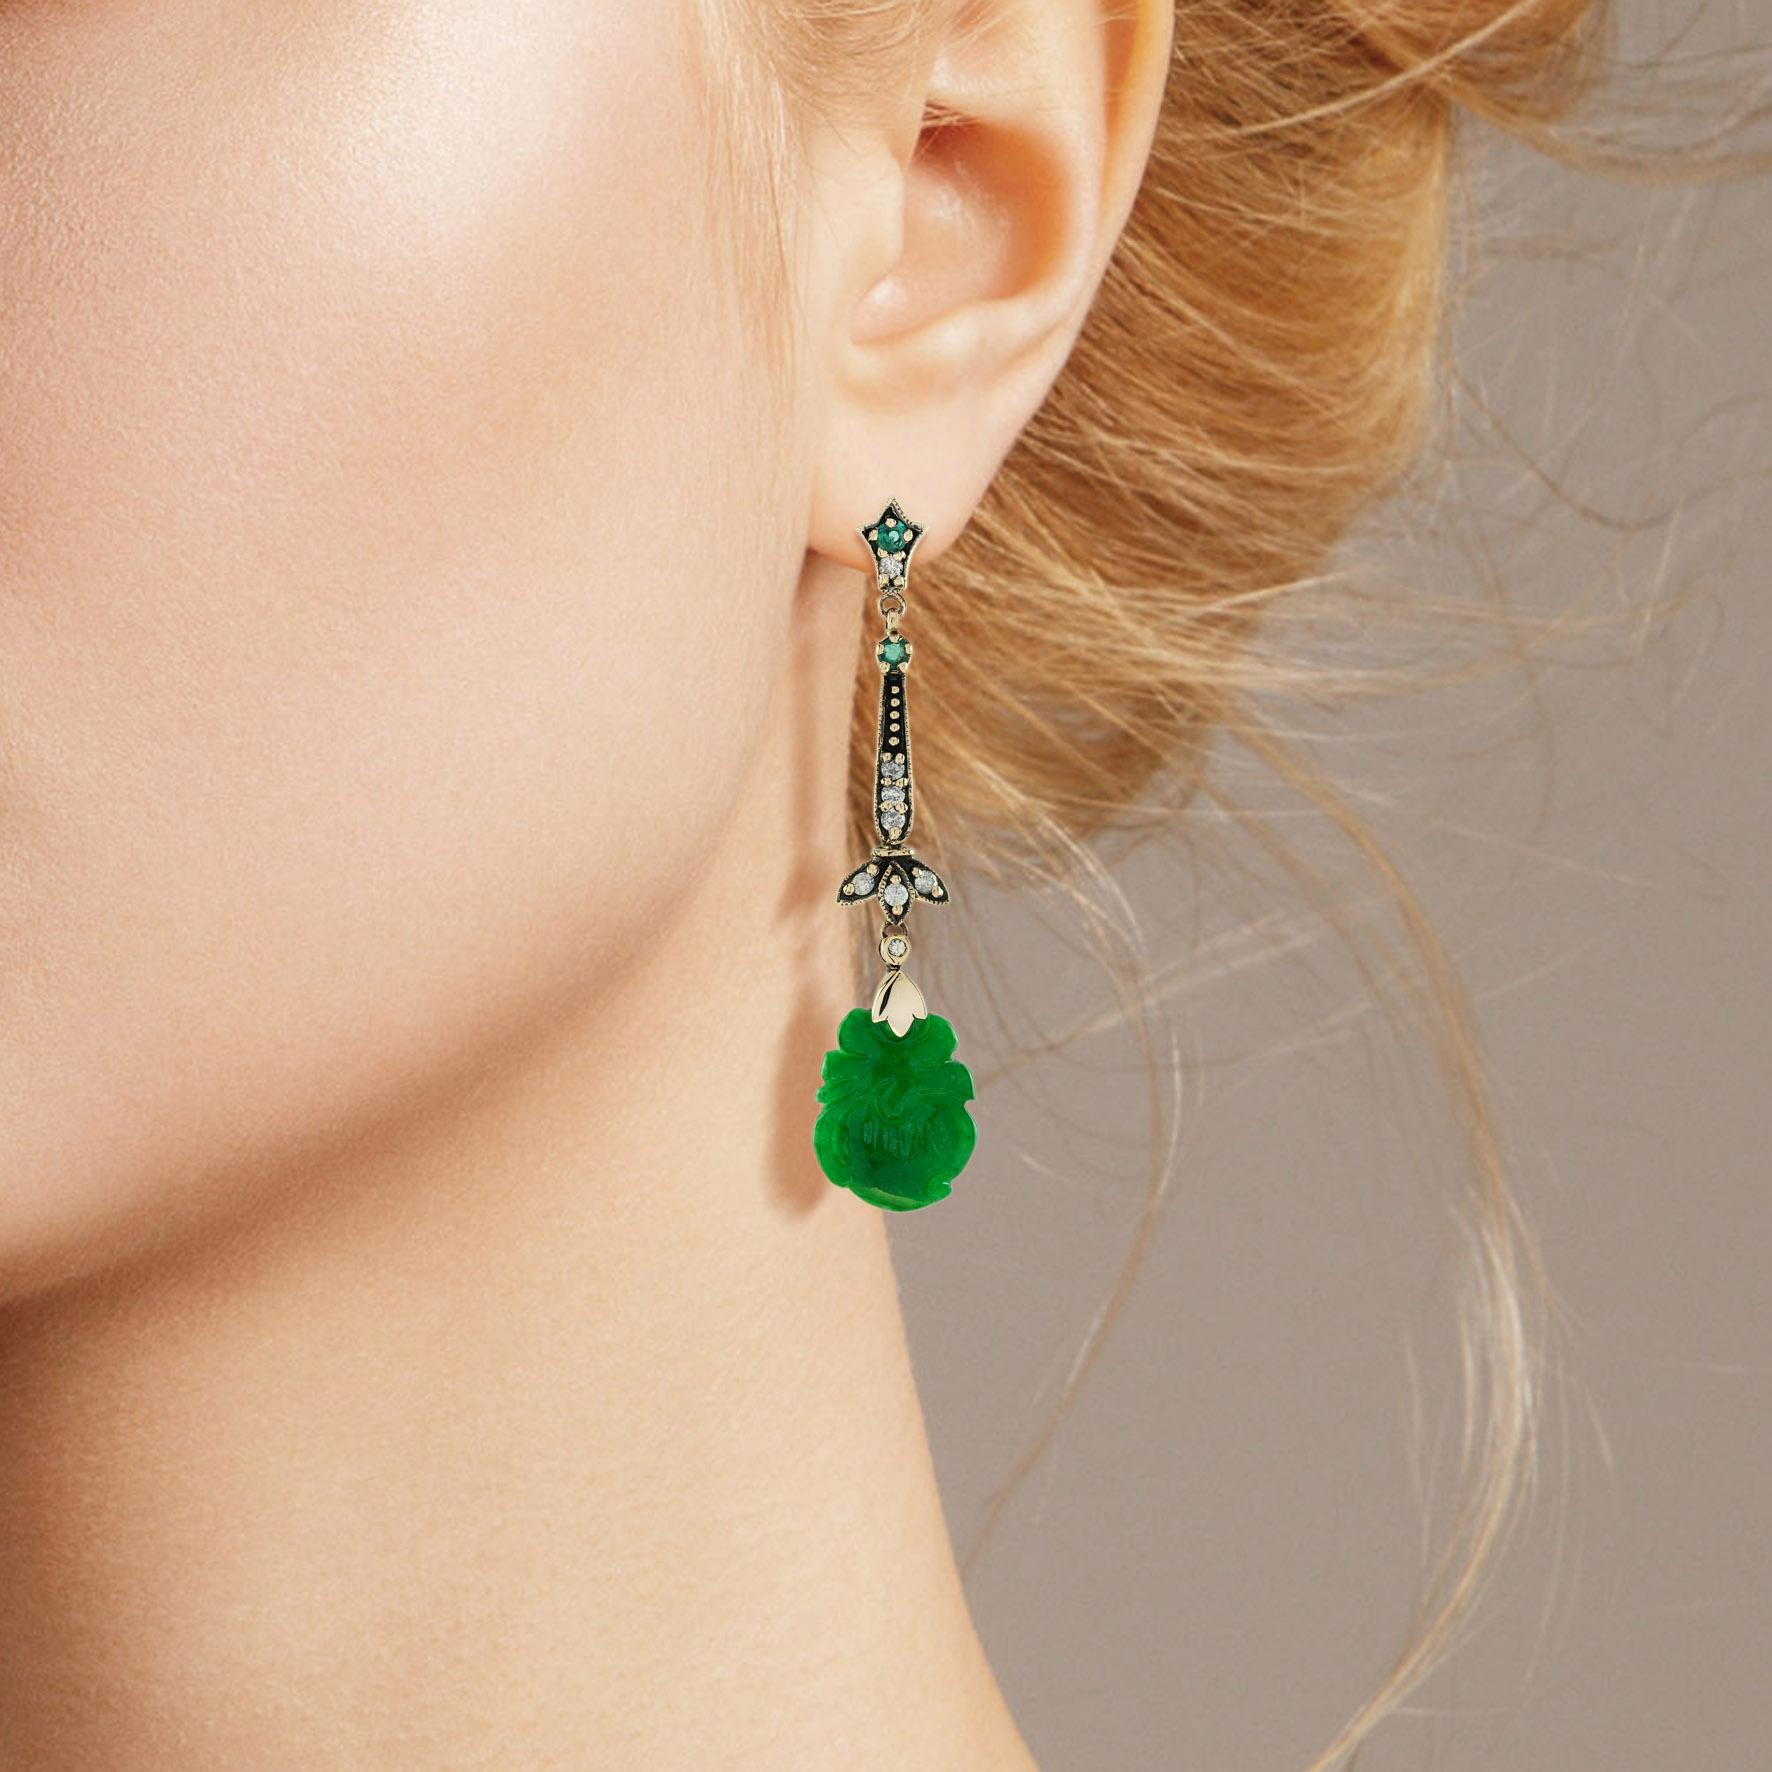 The natural jade in these lovely earrings has some very special shape. Both pieces have a strong green color and well carvings. The jade is suspended in a 9k yellow gold setting with emerald, pearl and diamond link on the top. The earrings transfer